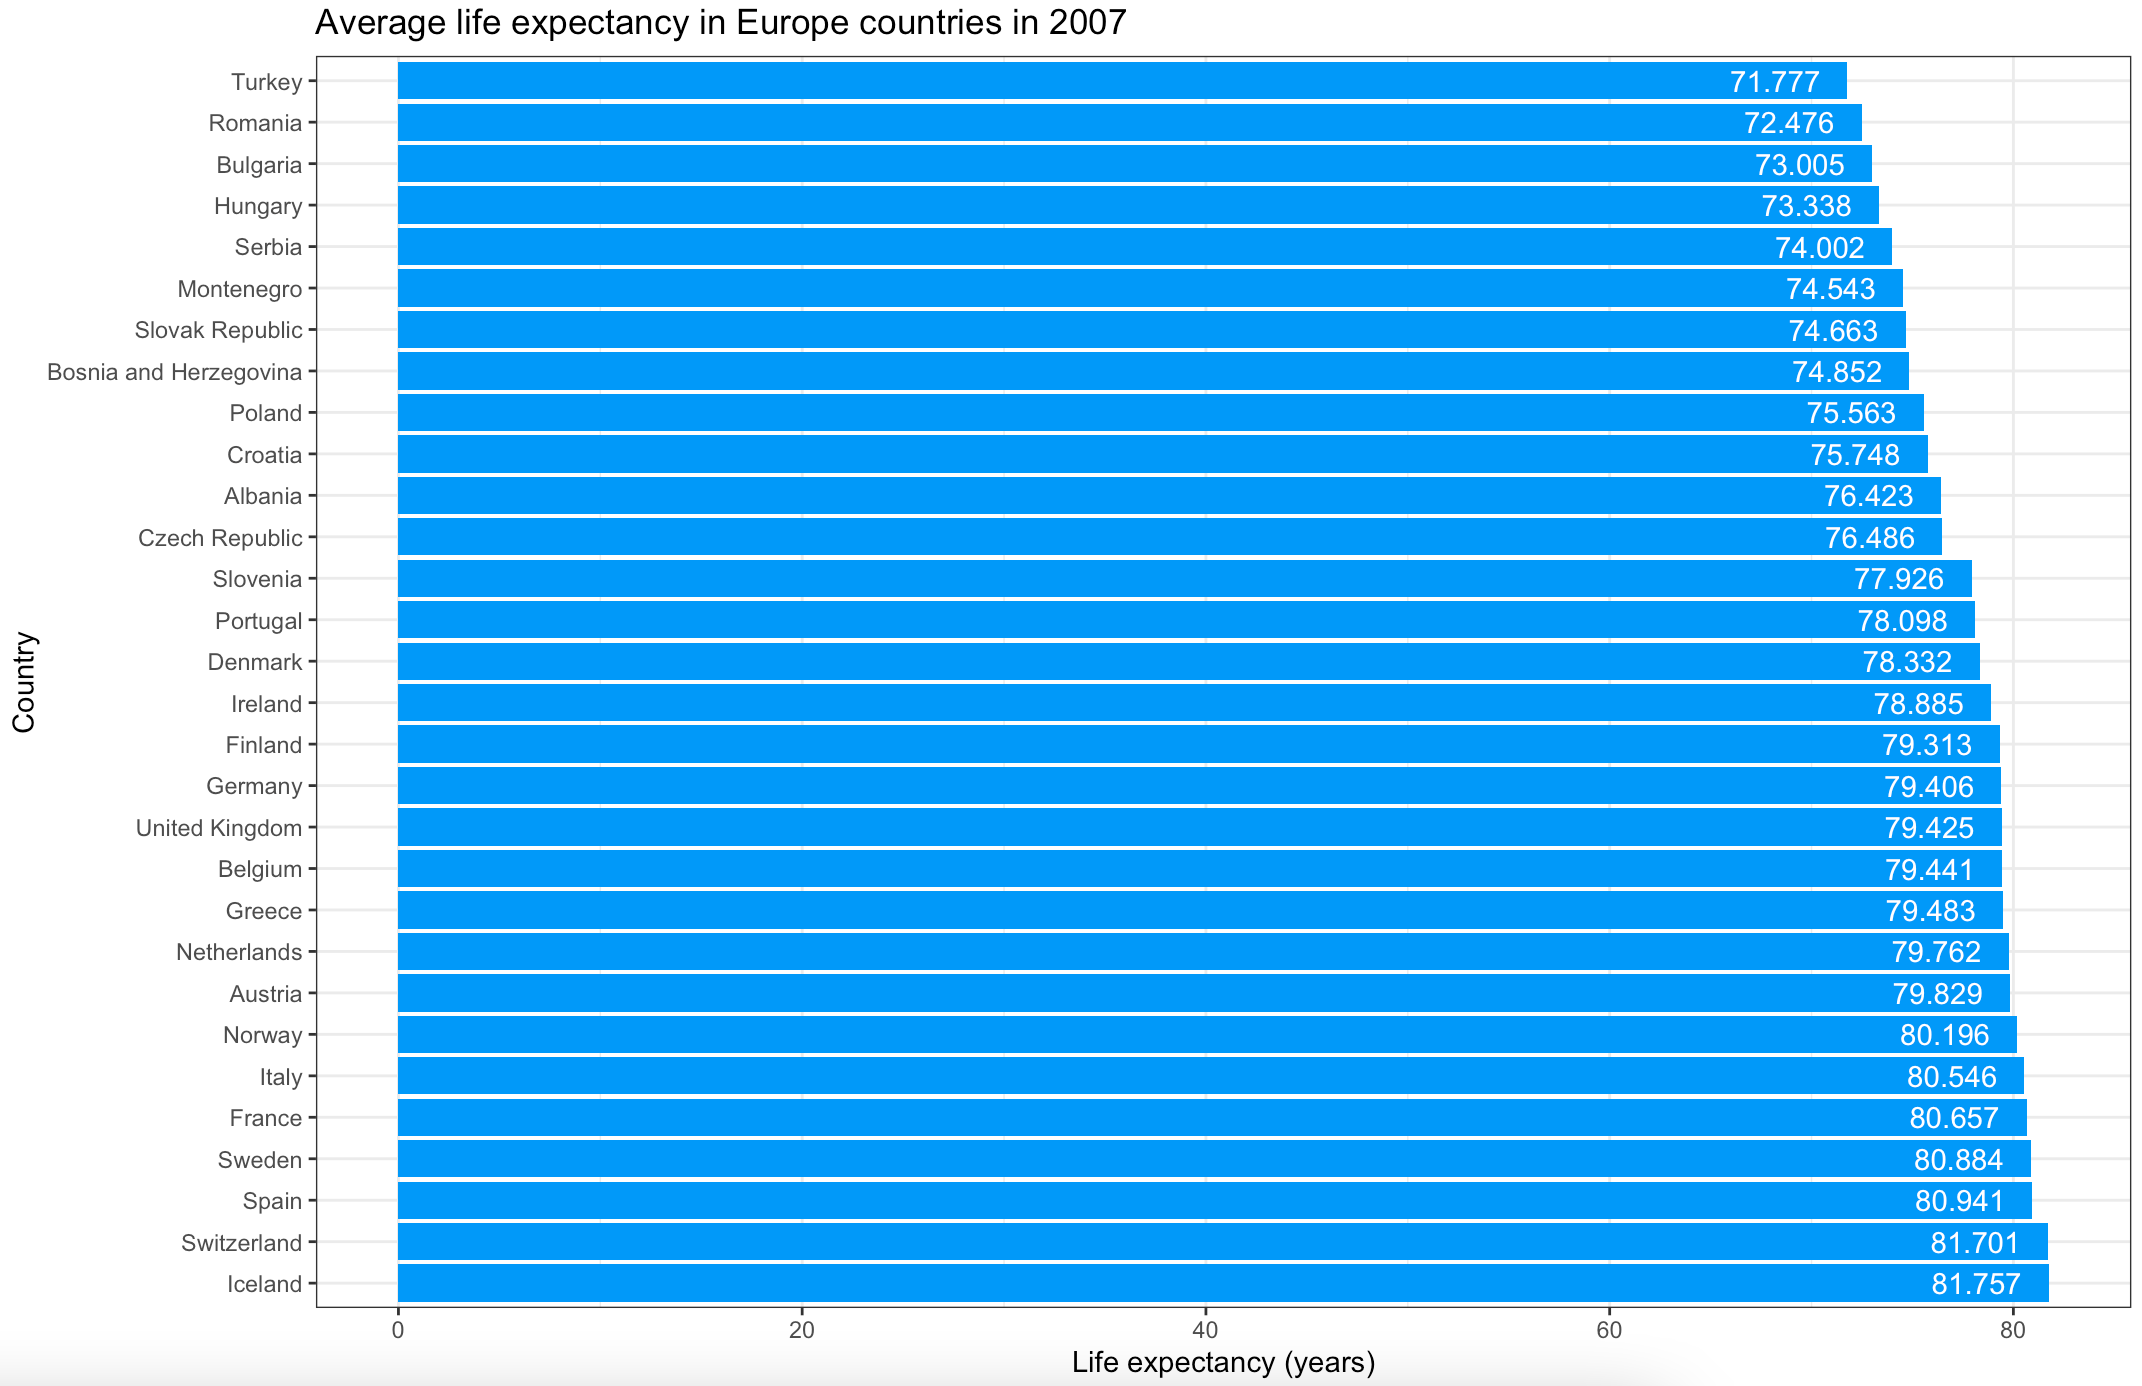 Image 8 - Average life expectancy in European countries in 2007